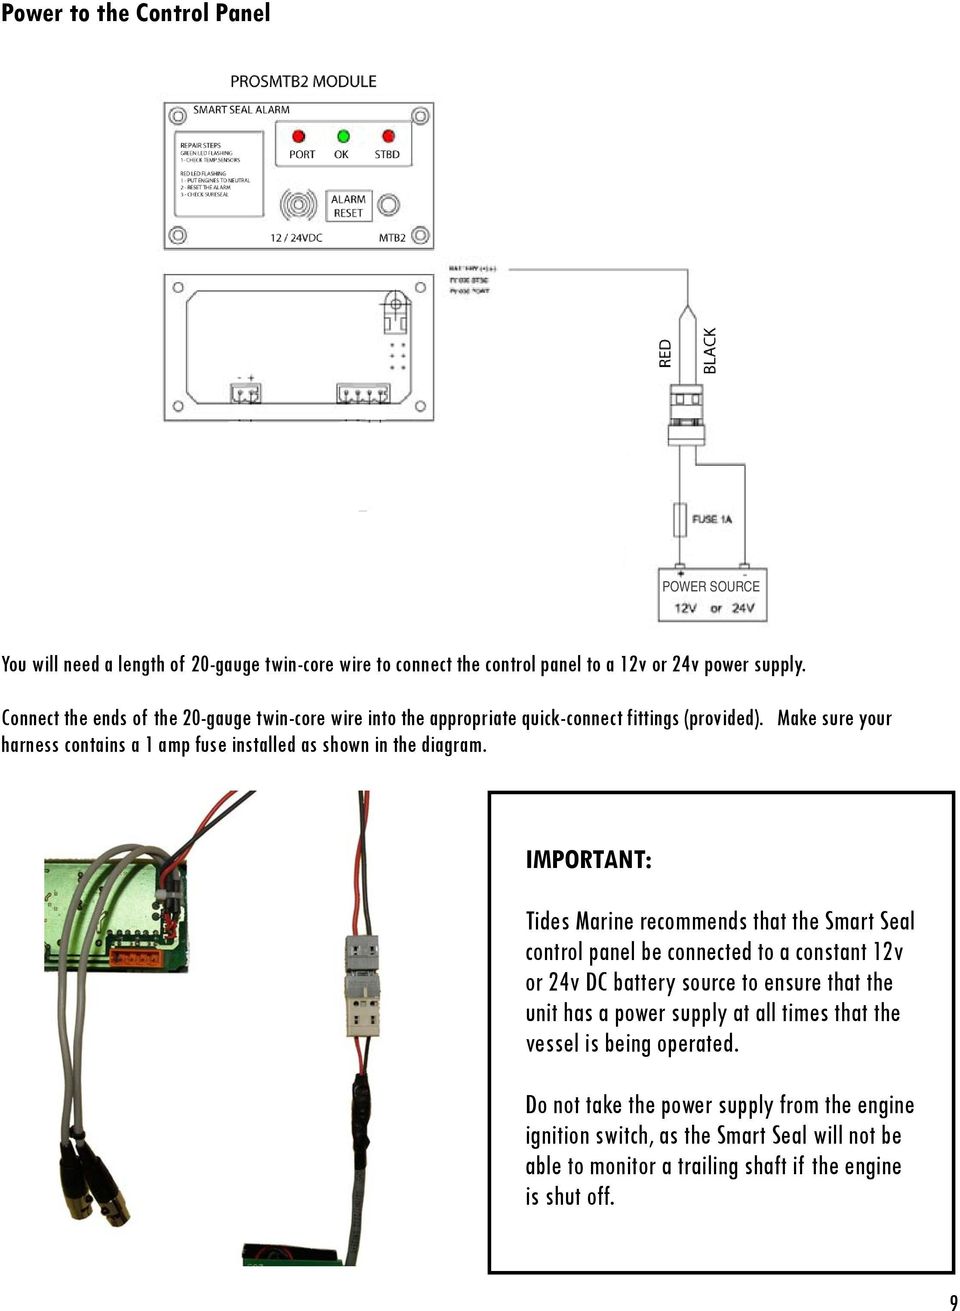 Make sure your harness contains a 1 amp fuse installed as shown in the diagram.